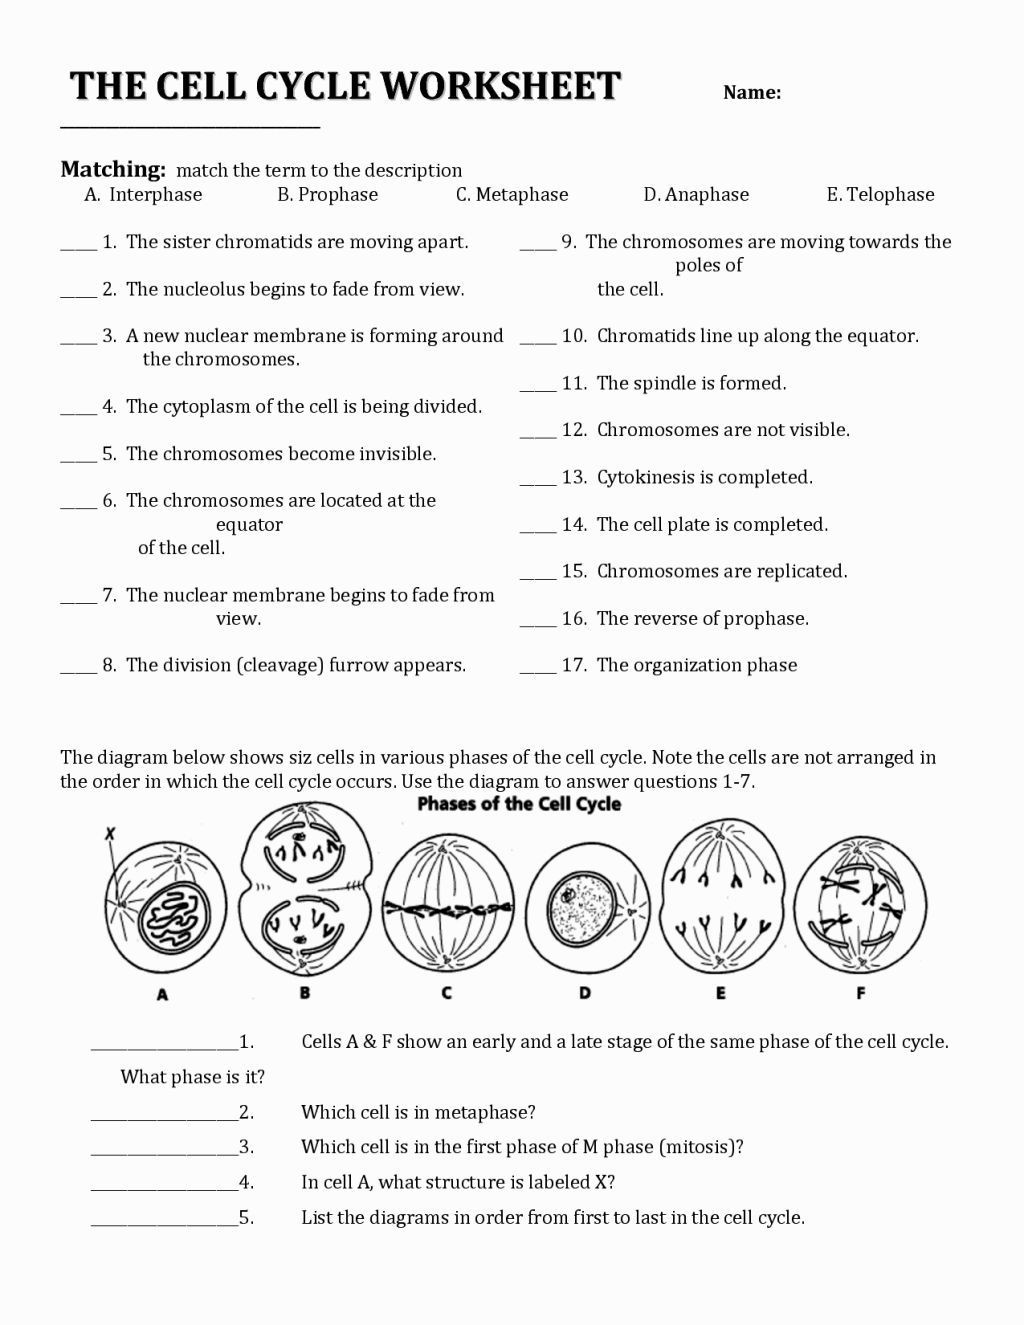 Onion Cell Mitosis Worksheet Answers the Cell Cycle Coloring Worksheet Key